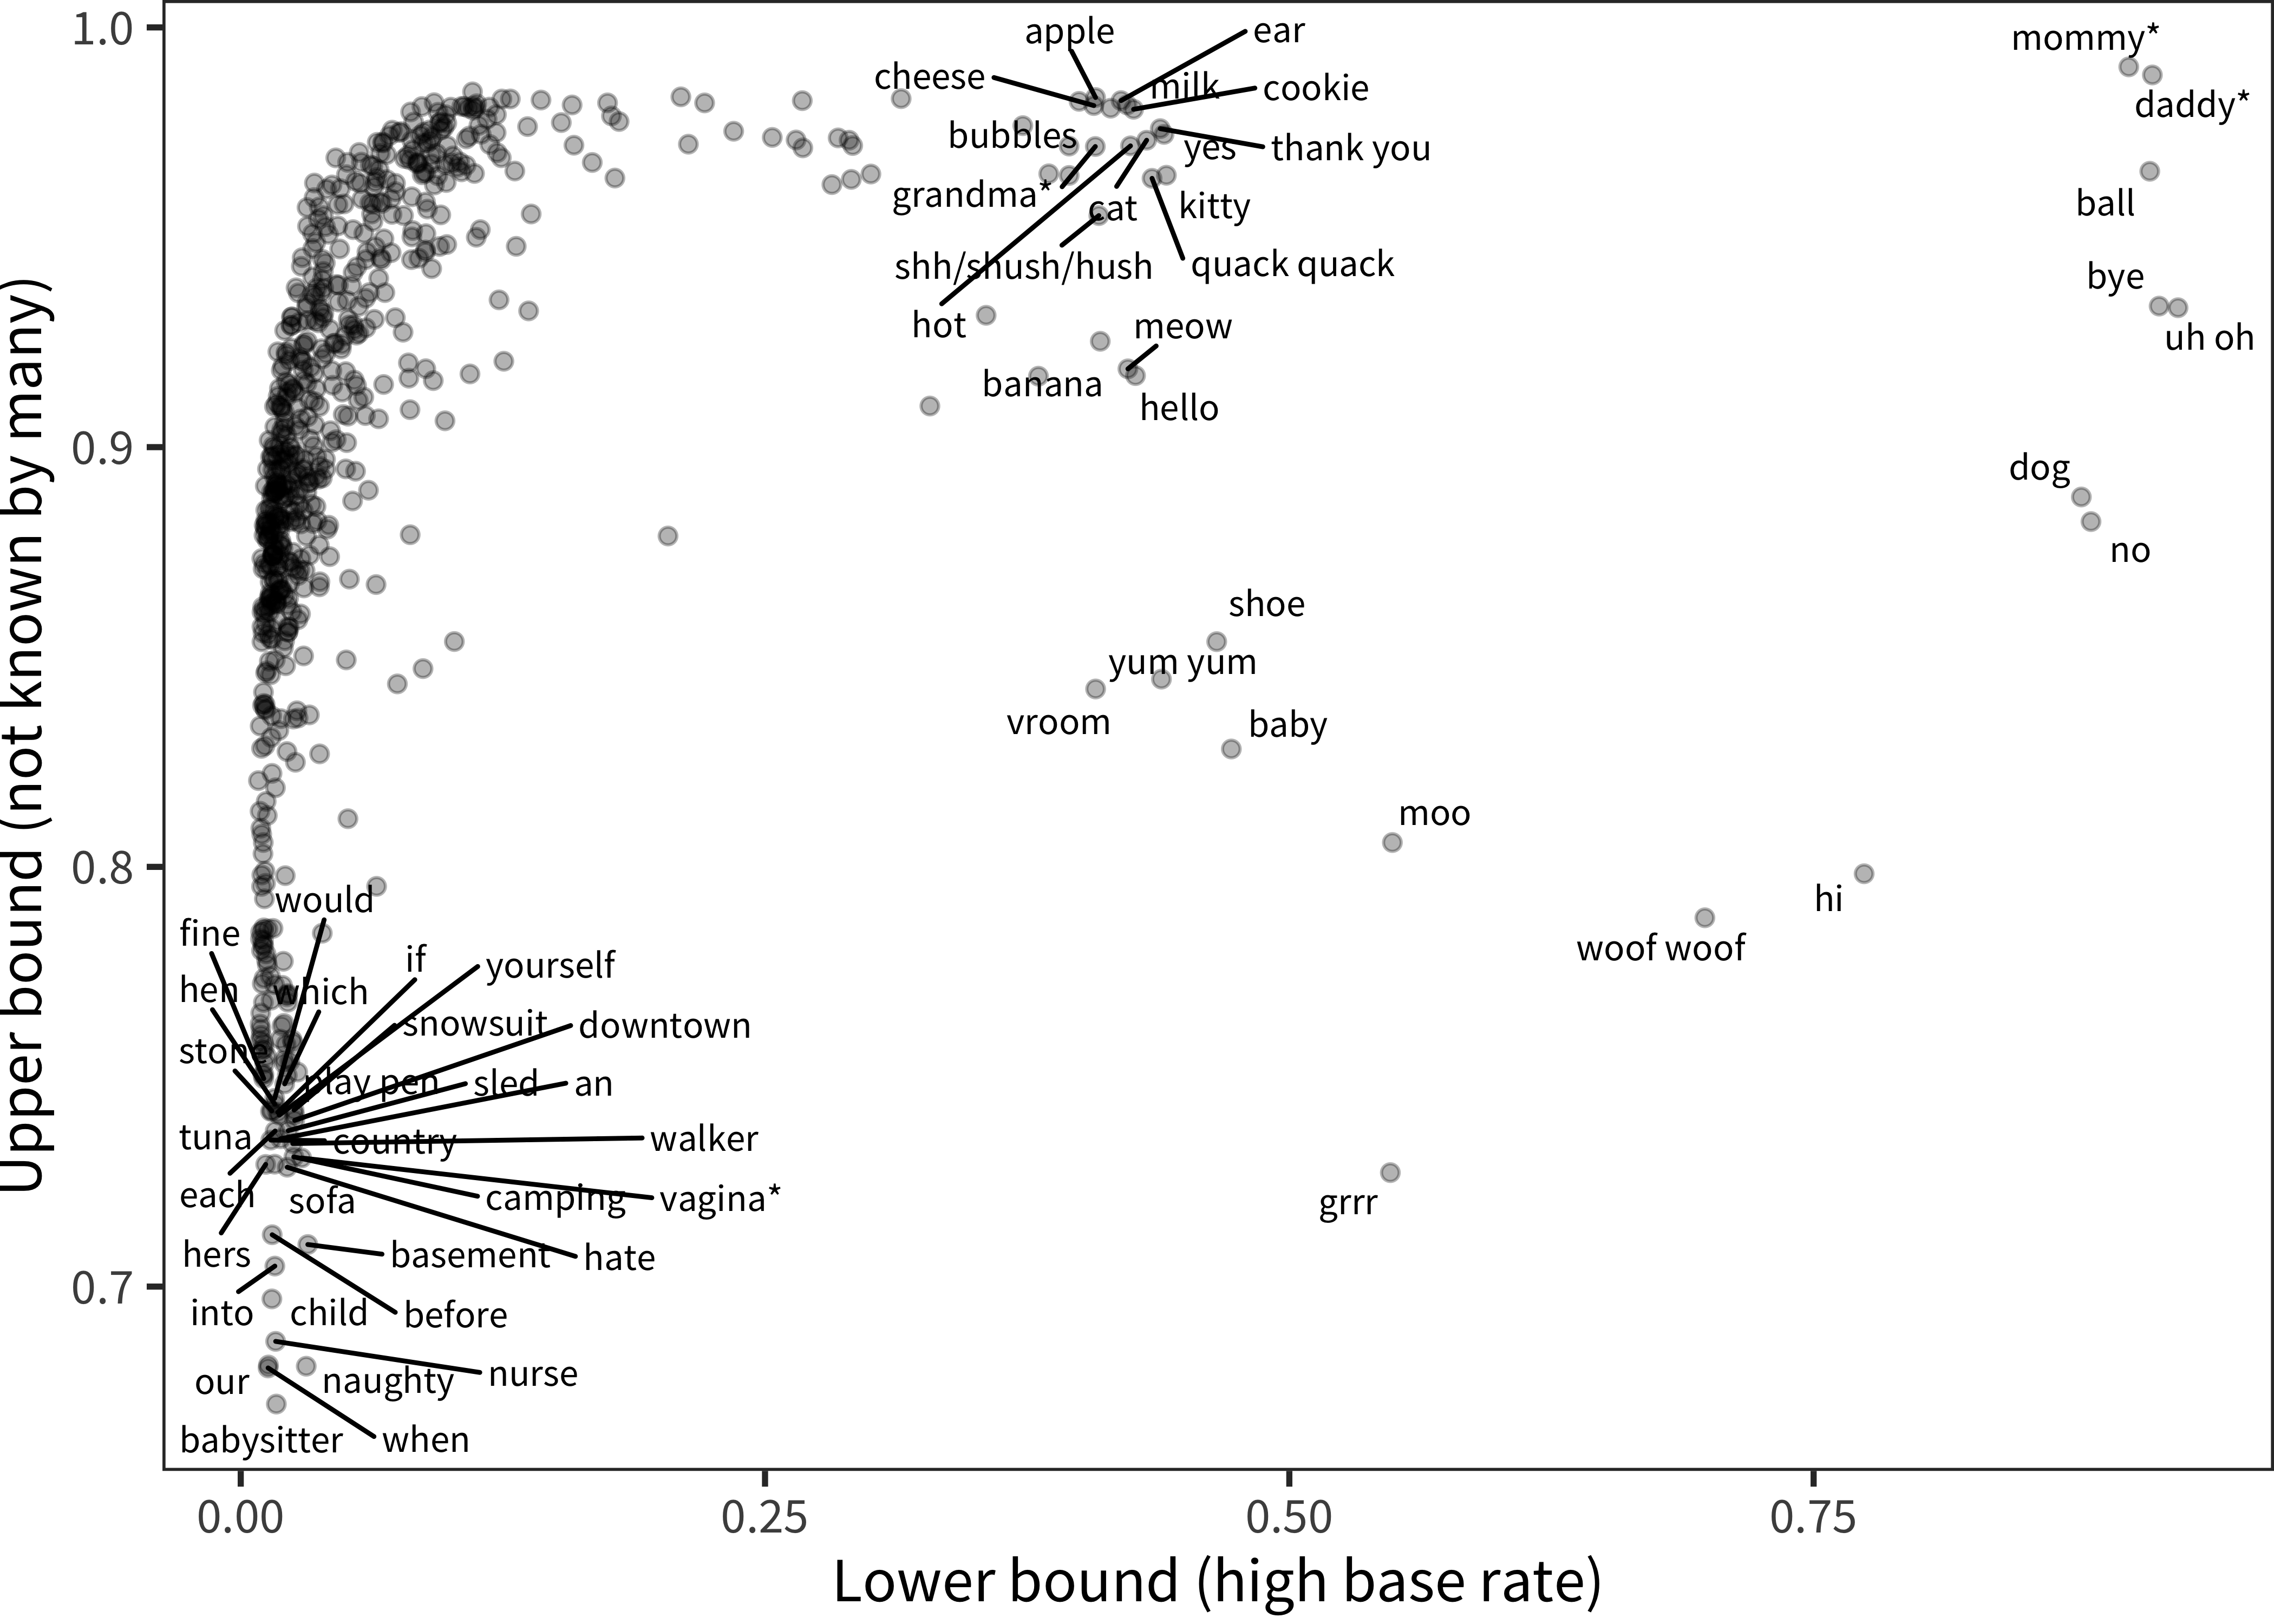 Words (points), plotted now by their lower and upper bound parameters from the 4-parameter IRT model.